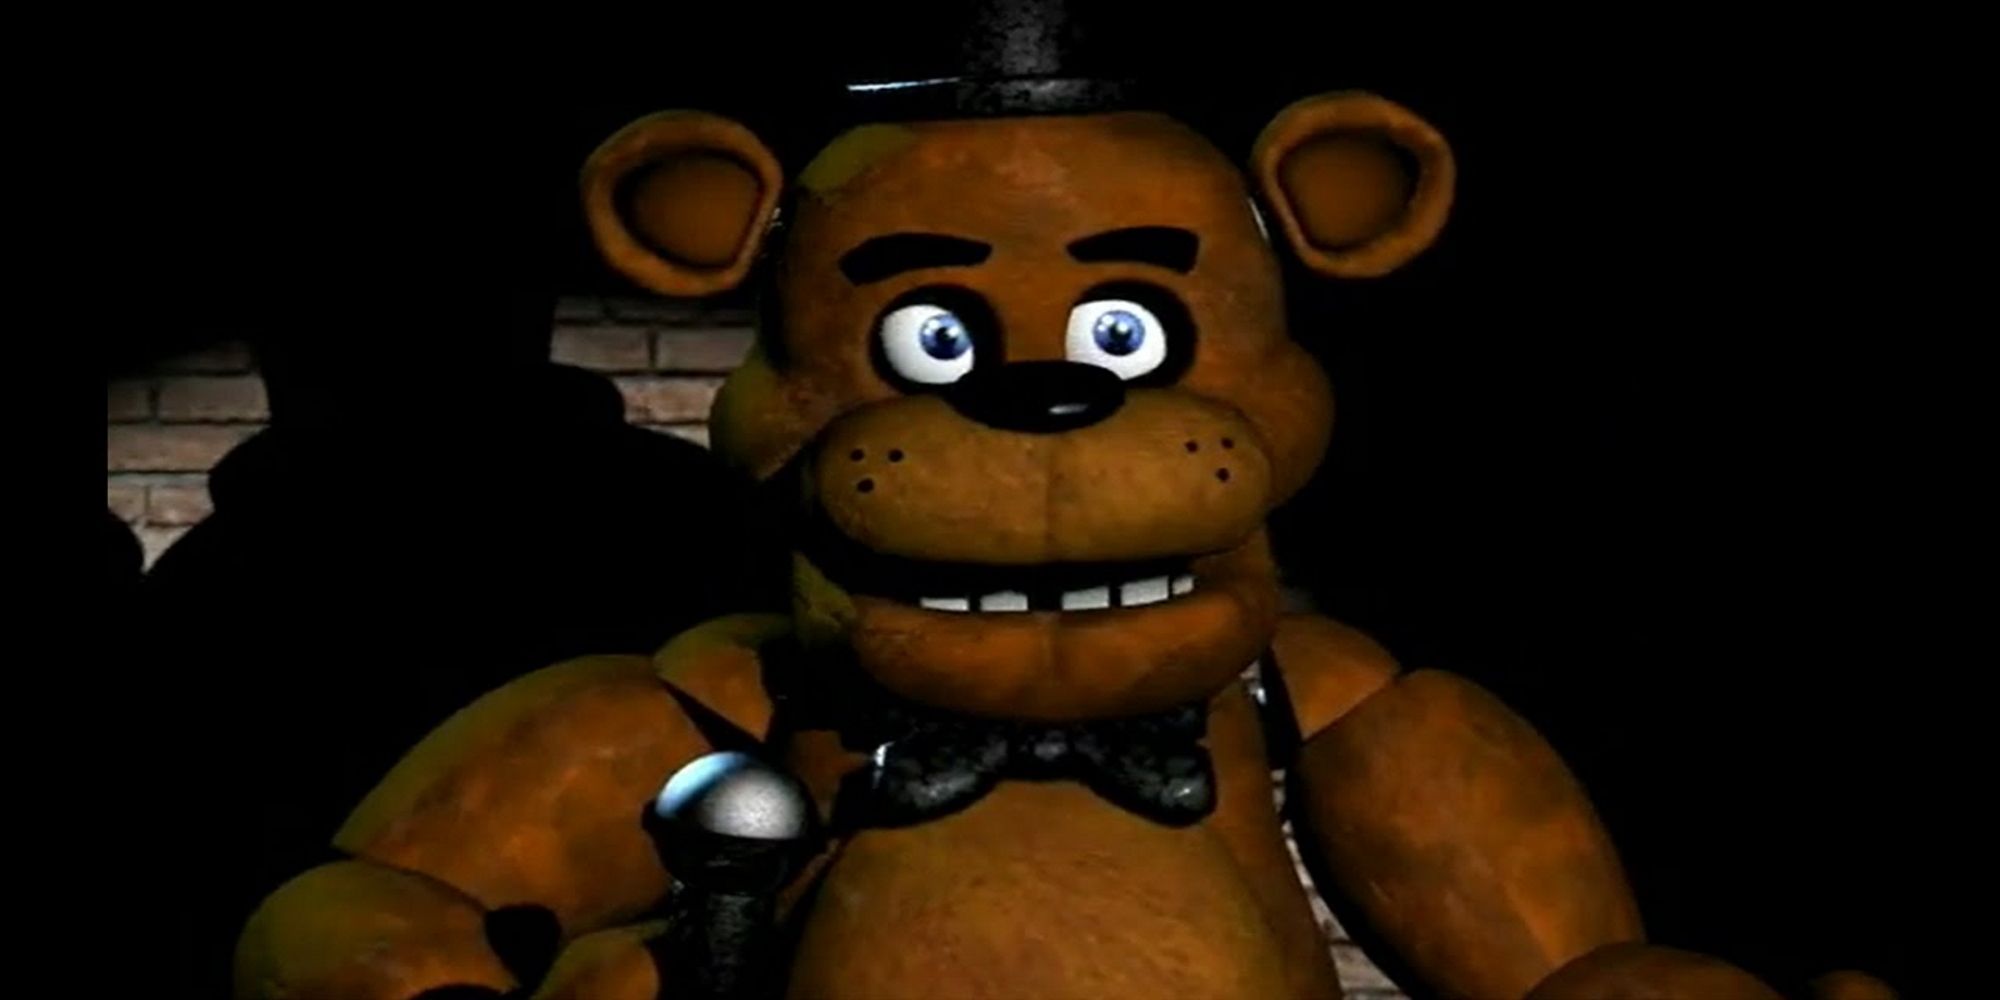 Five Nights At Freddy's - Freddy Fazbear Holding A Microphone While On Stage